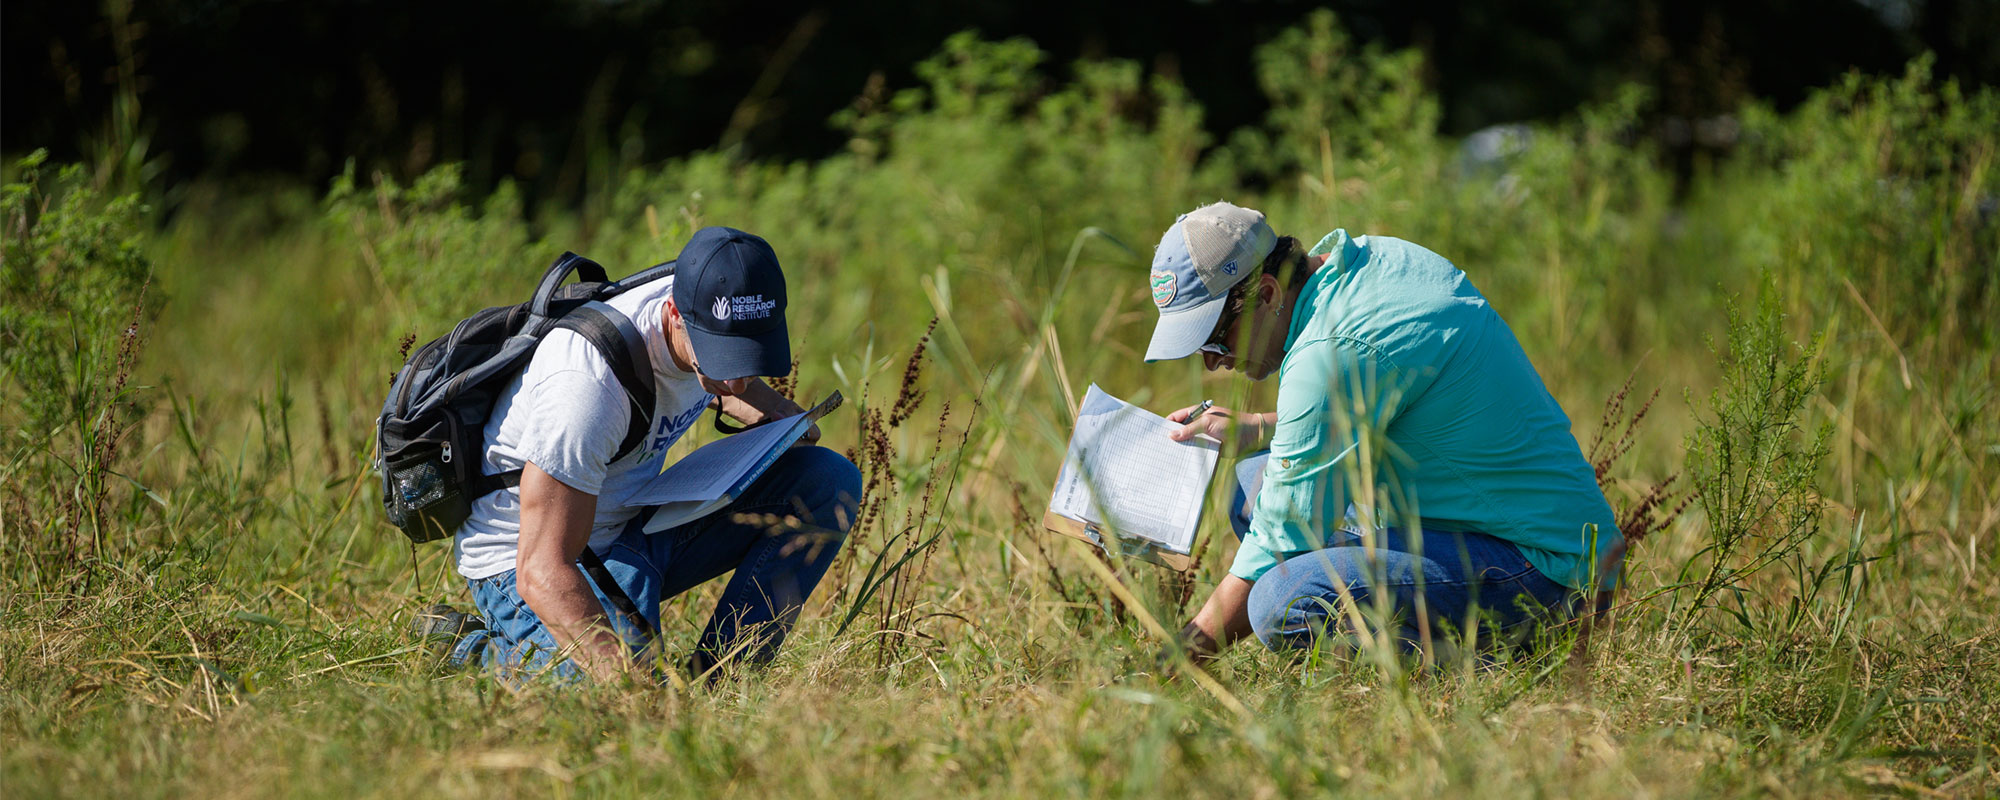 Noble Employees, Andrew Bancroft and Sindy Interrante, examine a regenerative pasture and take notes.